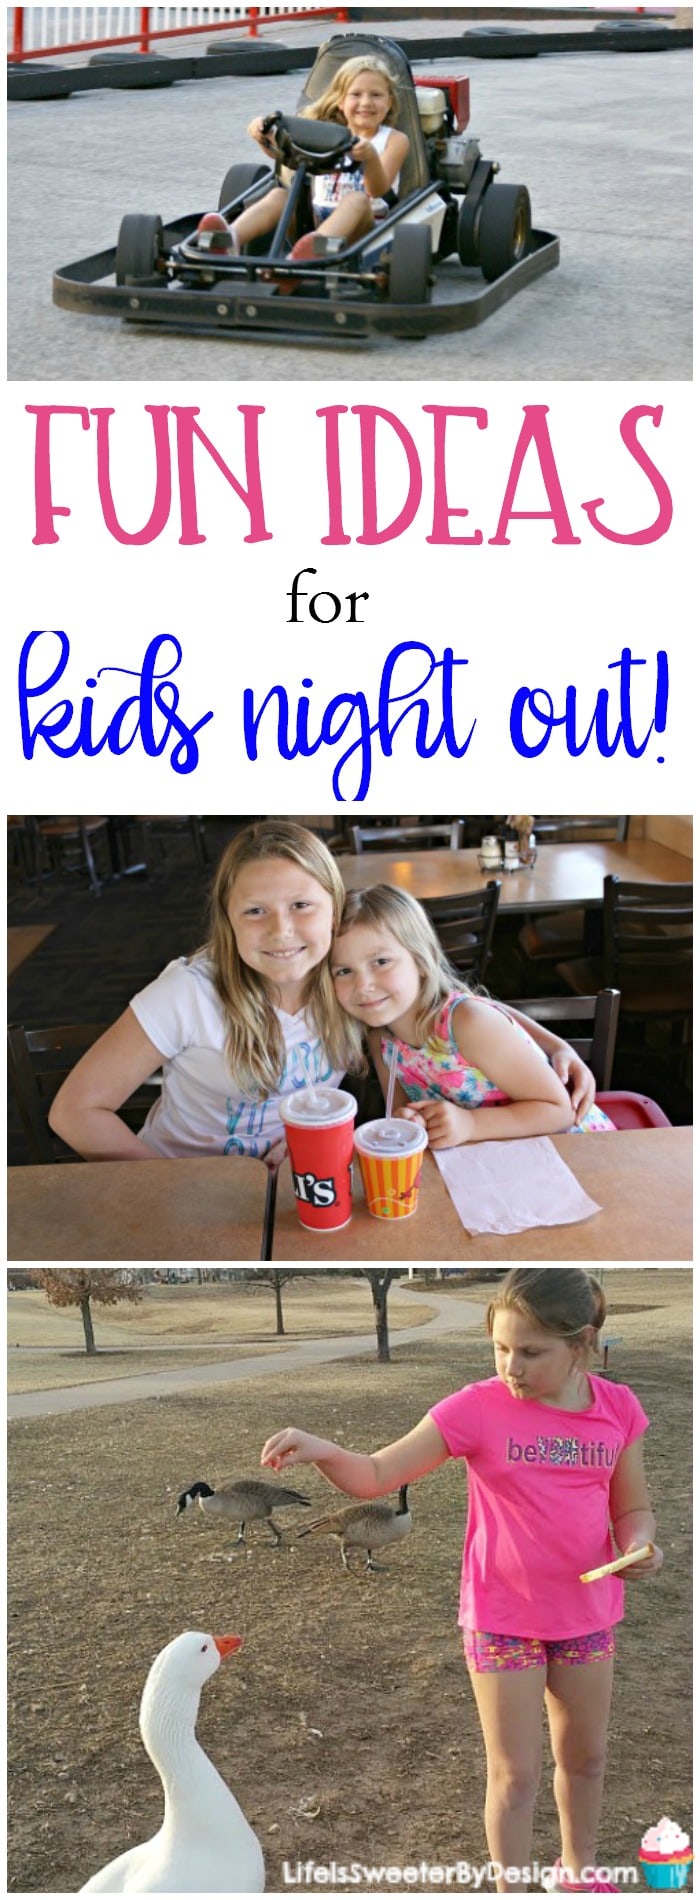 Kids night out is fun for the whole family. Check out these great ideas for family fun and how we love to start our night. AD